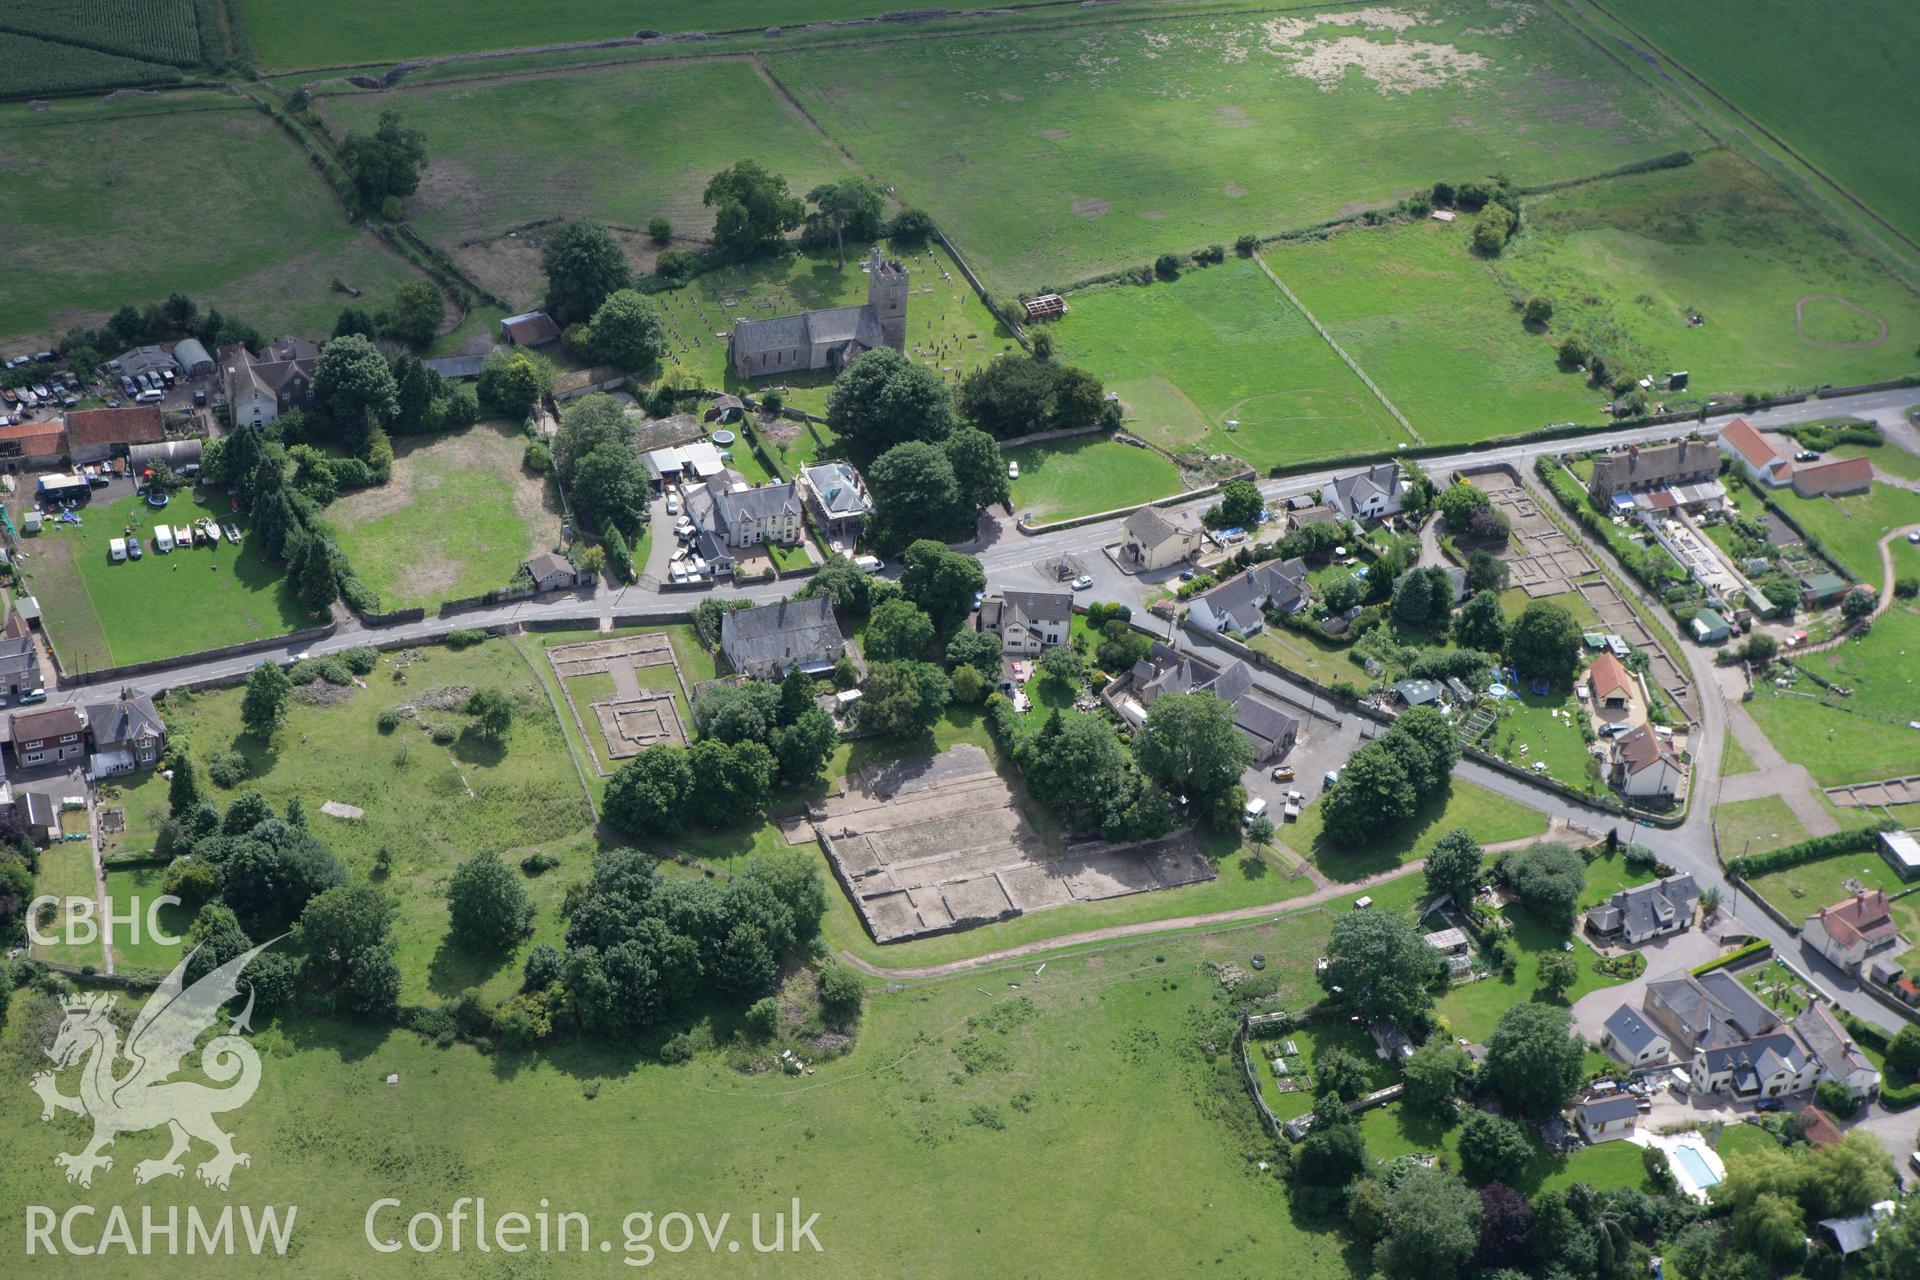 RCAHMW colour oblique photograph of Caerwent Roman City. Taken by Toby Driver on 29/07/2010.